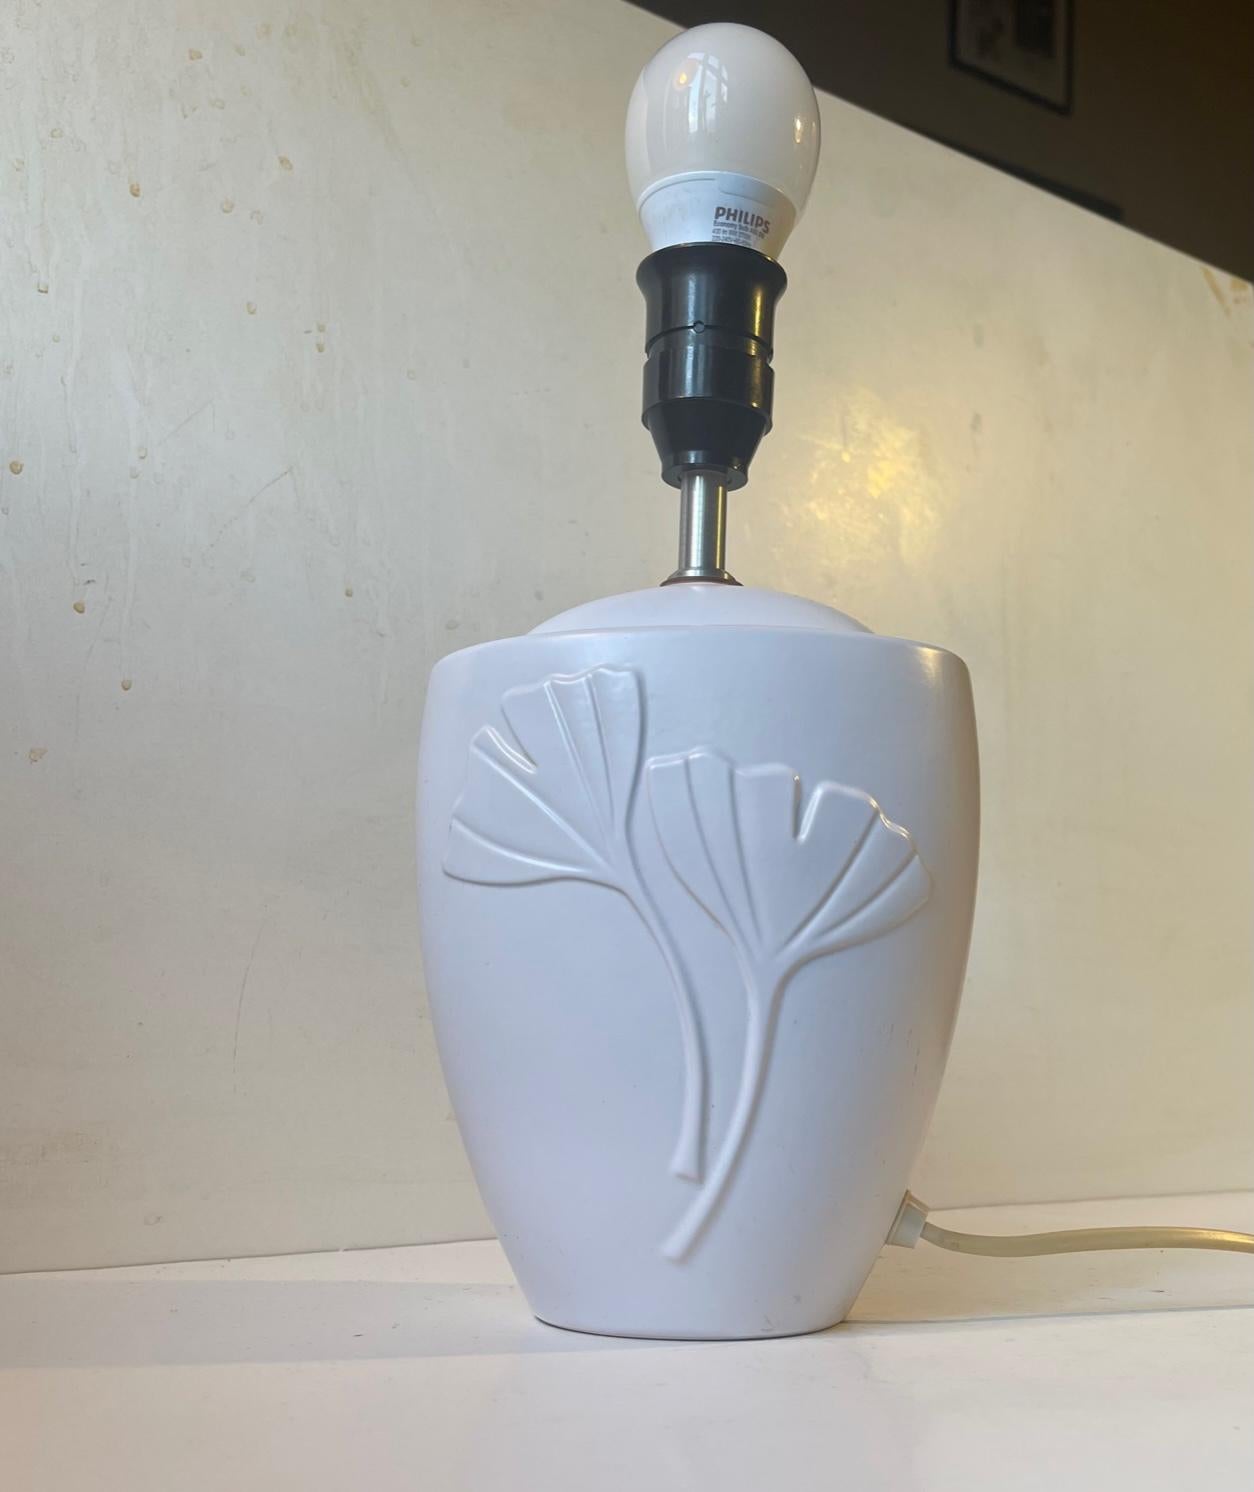 Art Deco Revival White Ceramic Table Lamp from Søholm In Good Condition For Sale In Esbjerg, DK